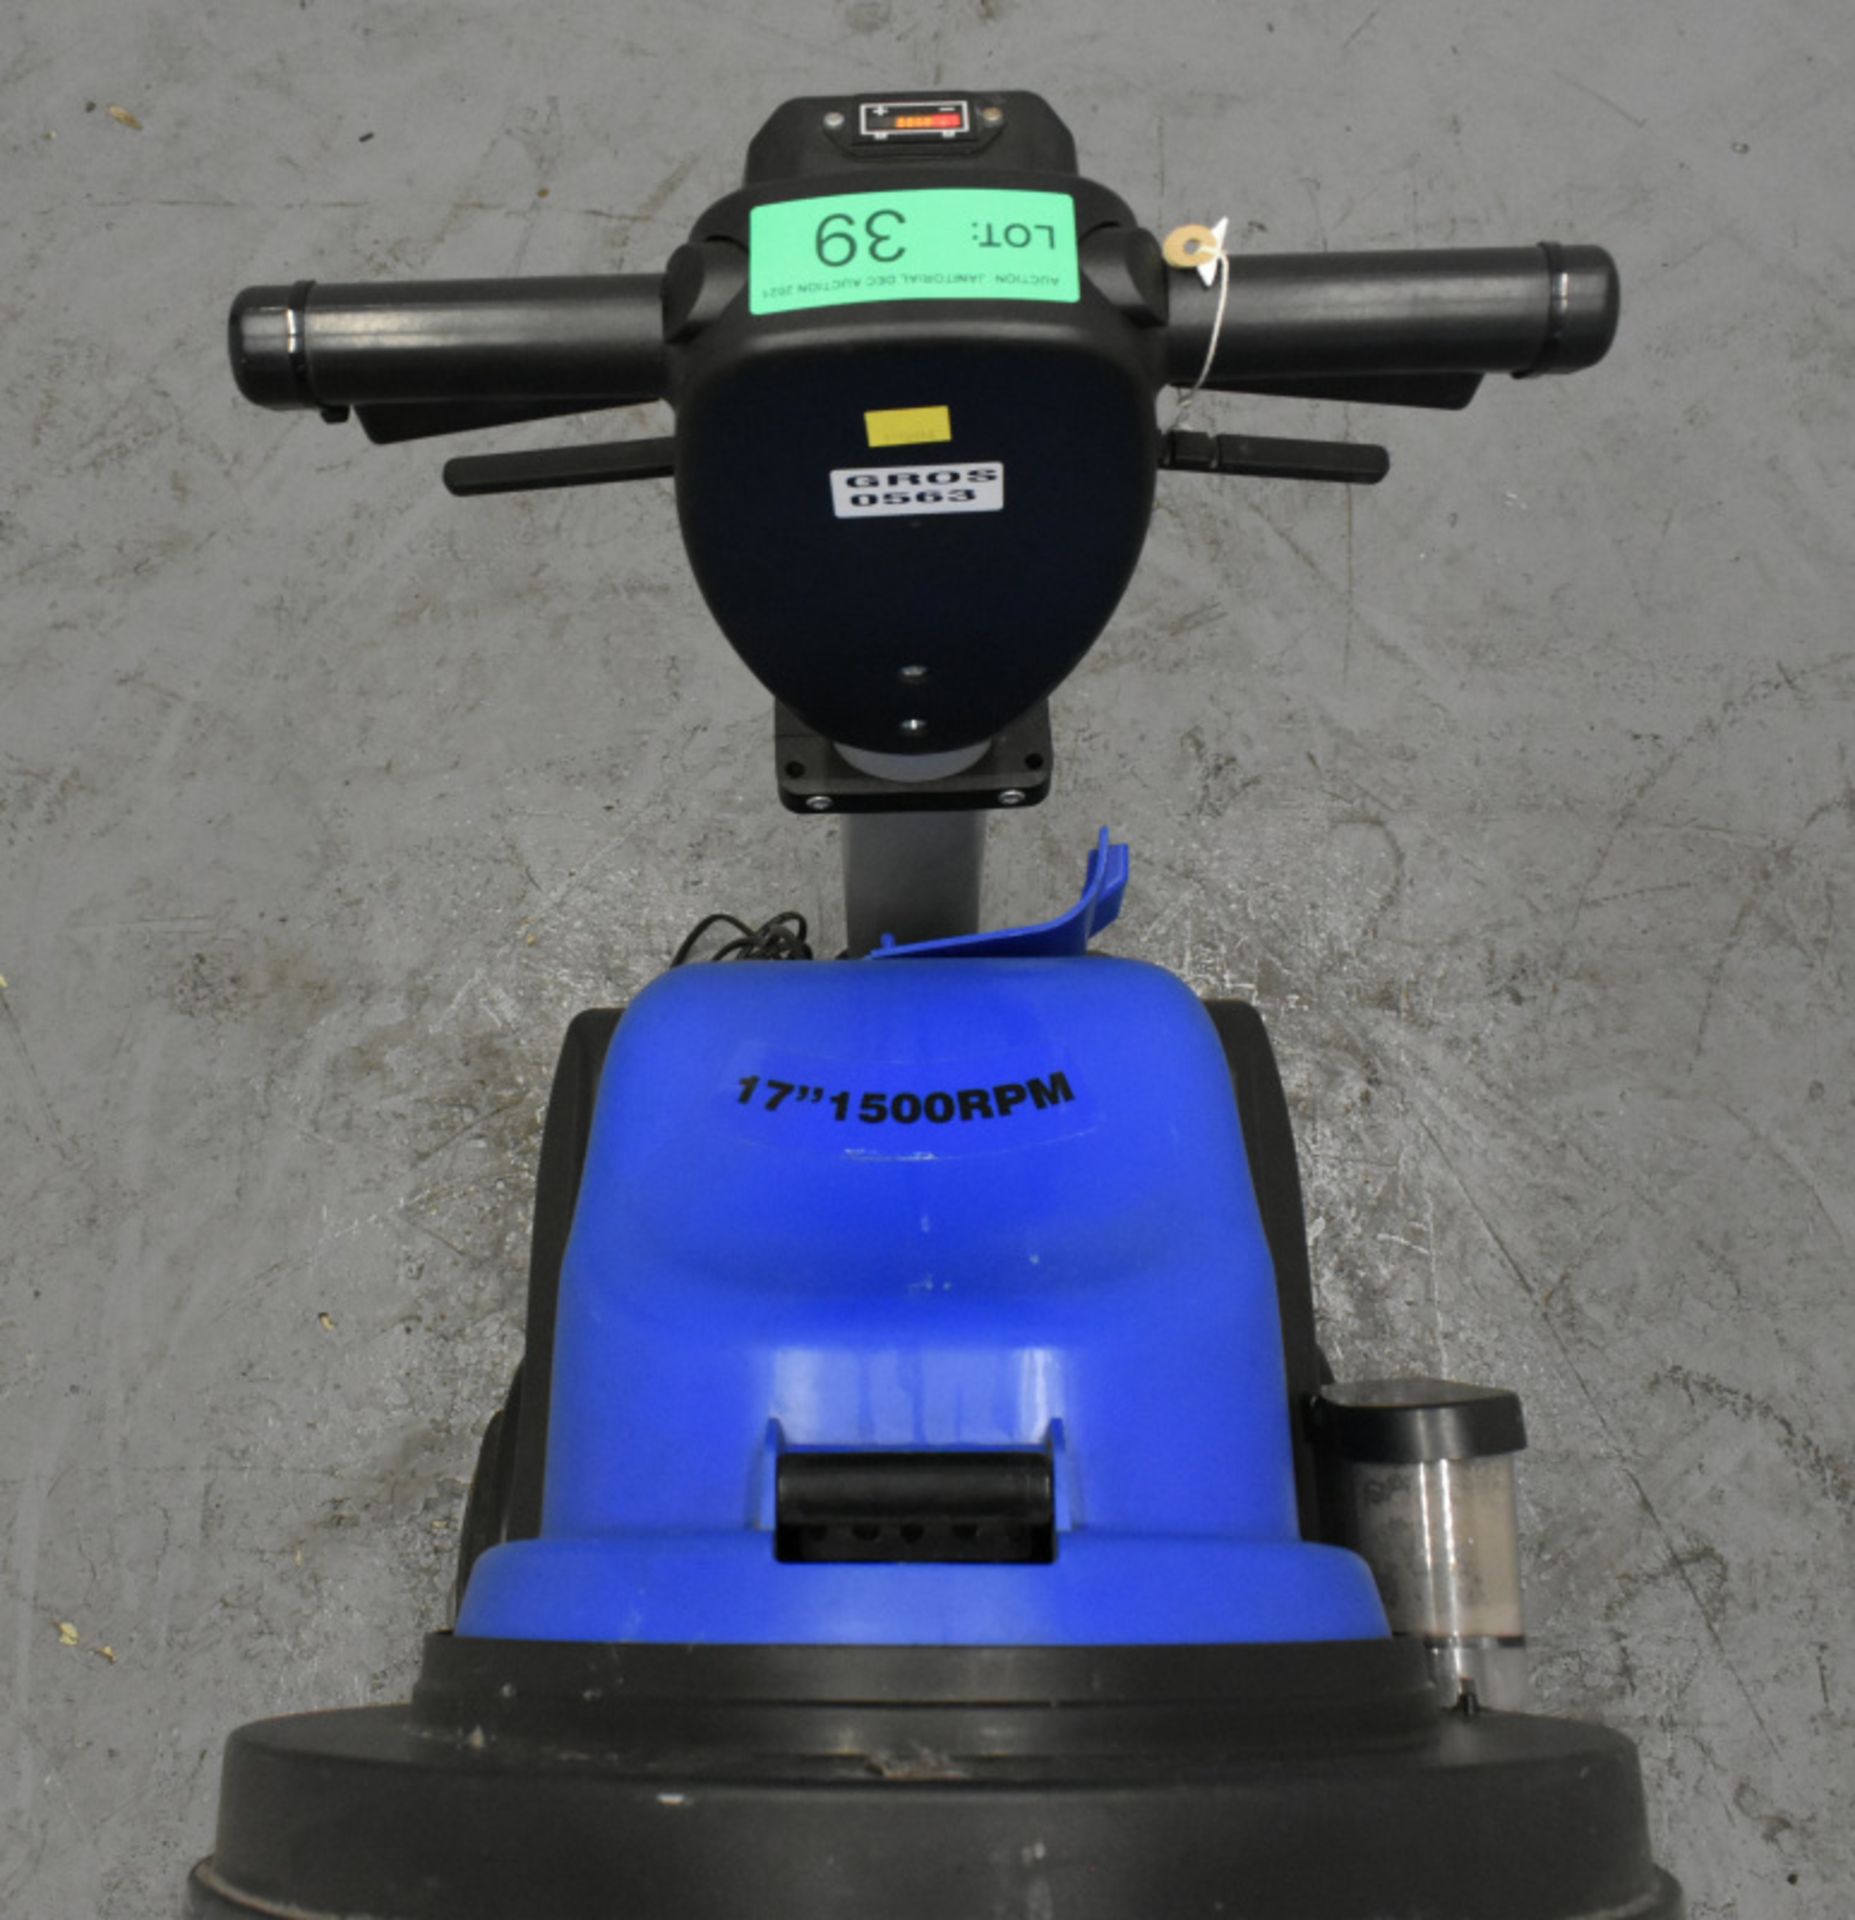 Truvox Cordless Burnisher 17" 1500RPM, comes with key, starts and runs - Image 3 of 4